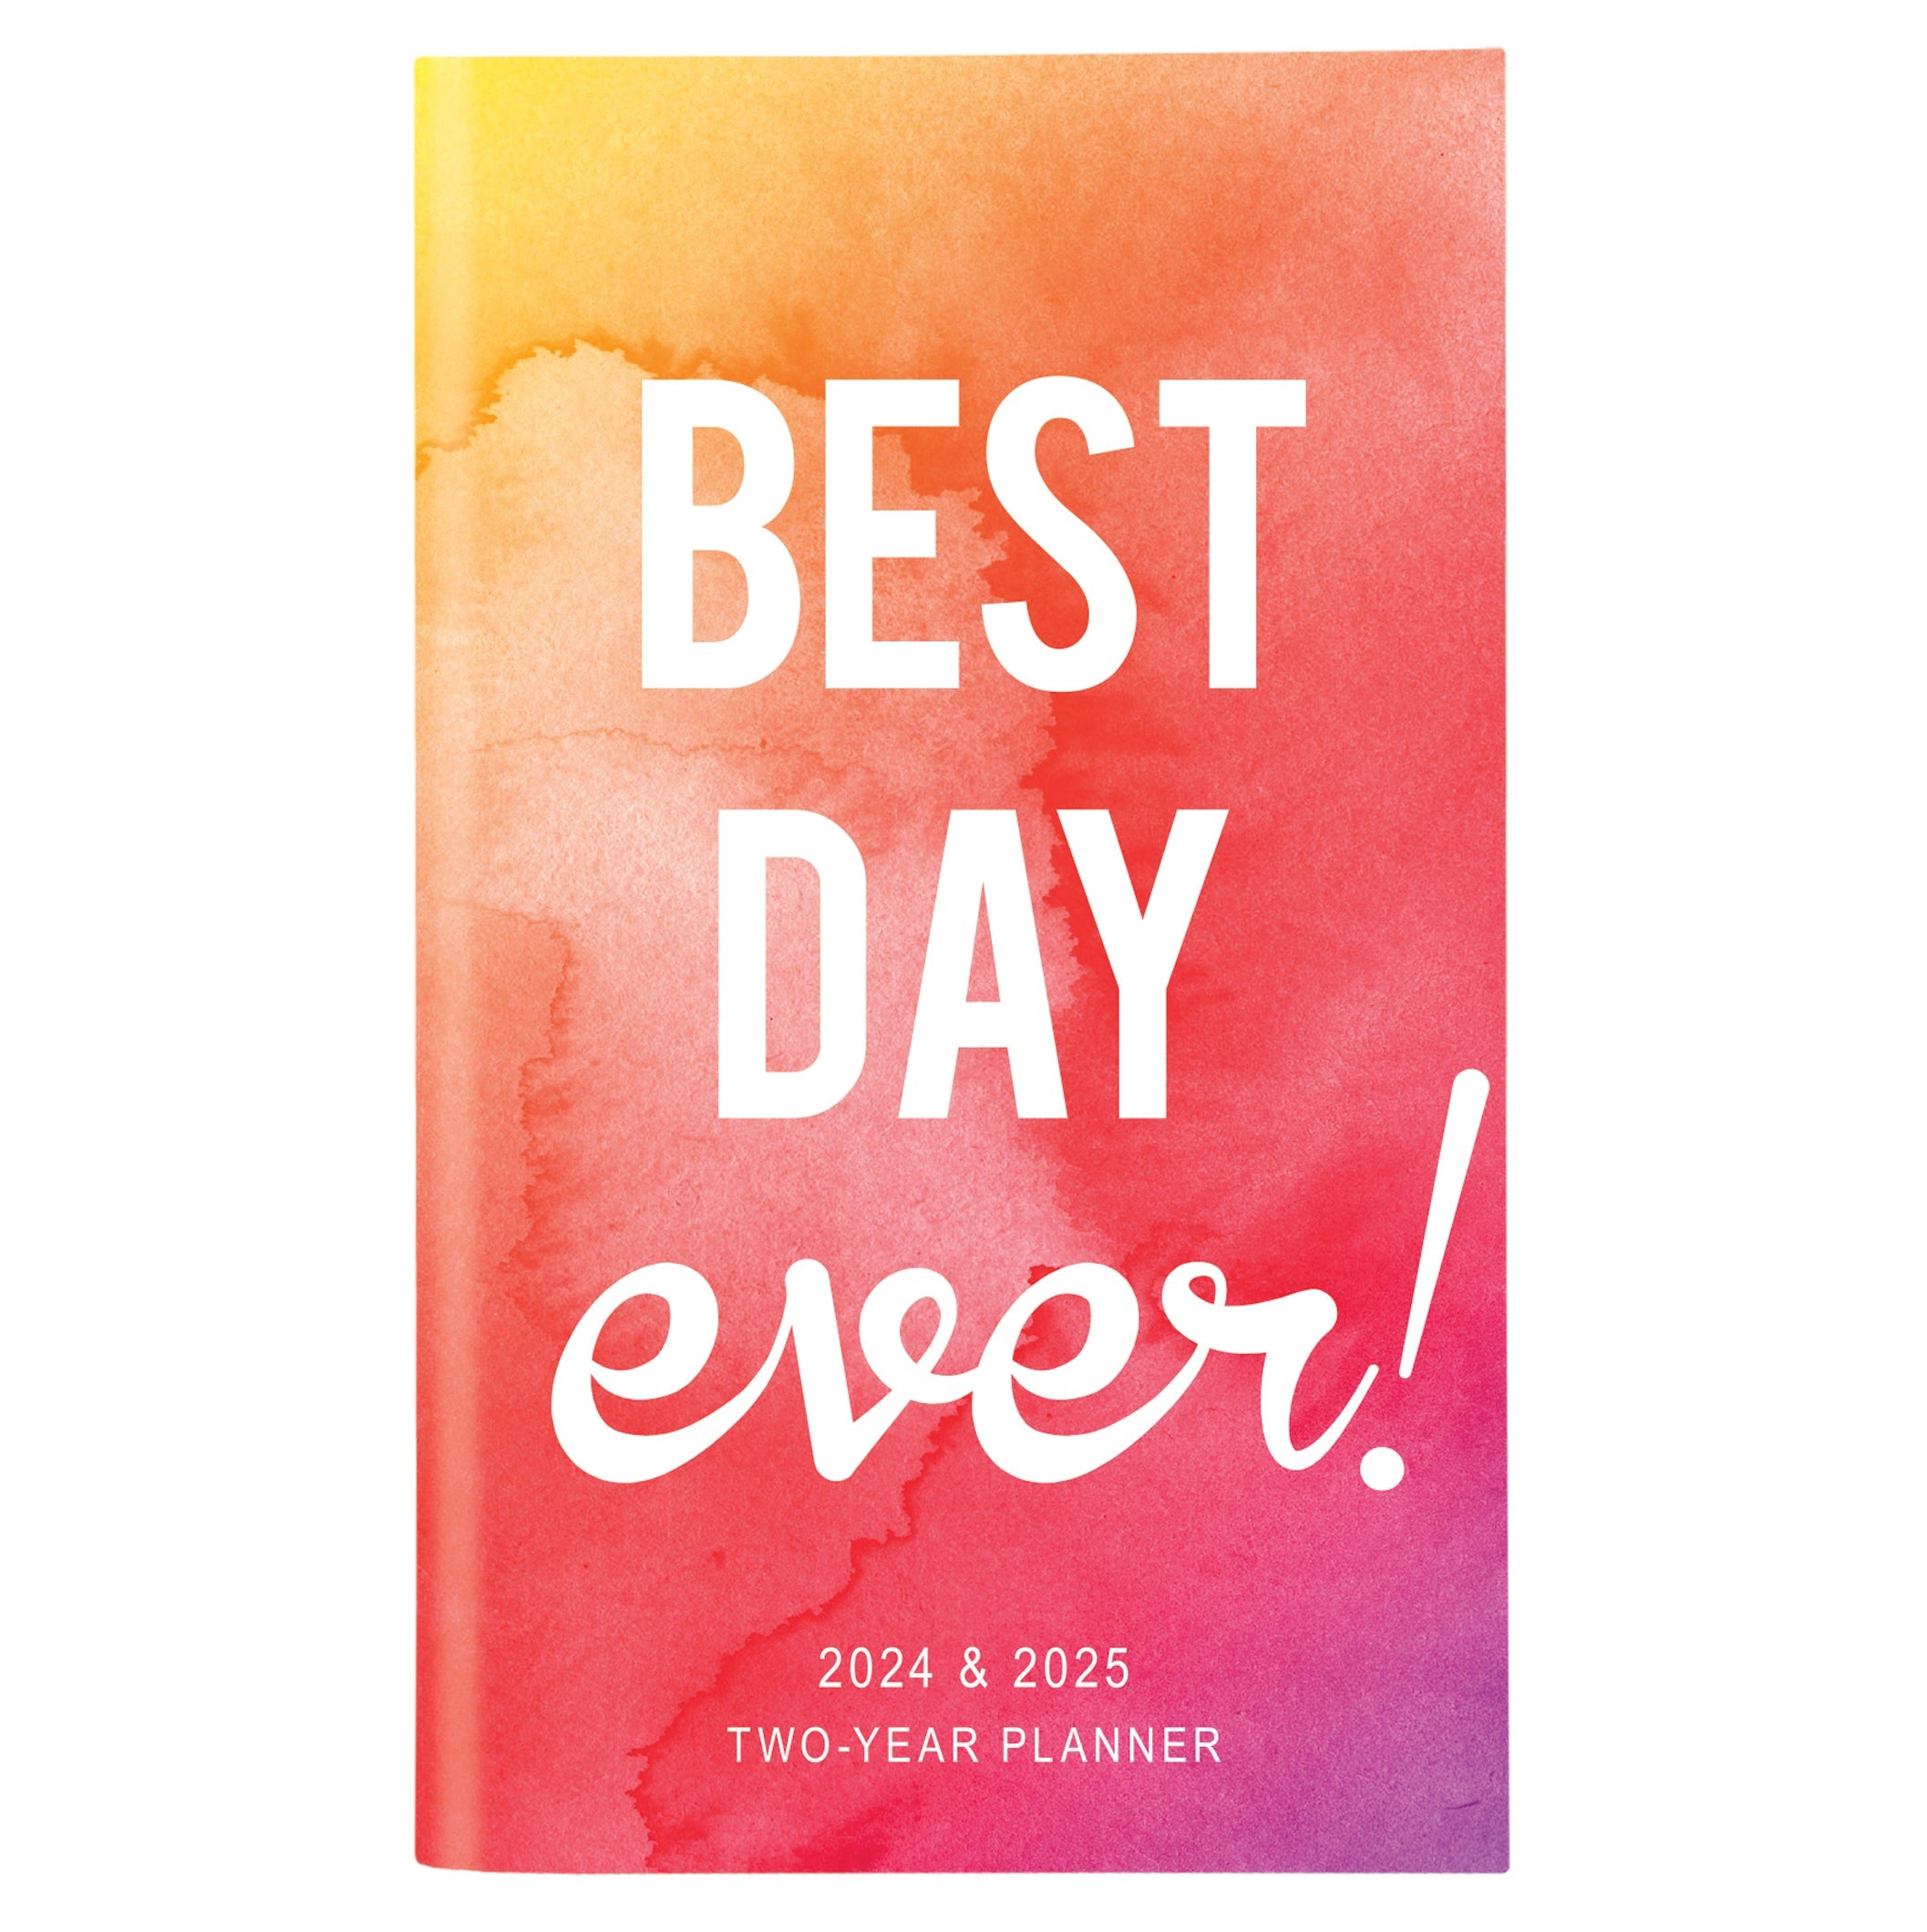 Best Day Ever! 2024-2025 Two-Year Planner    